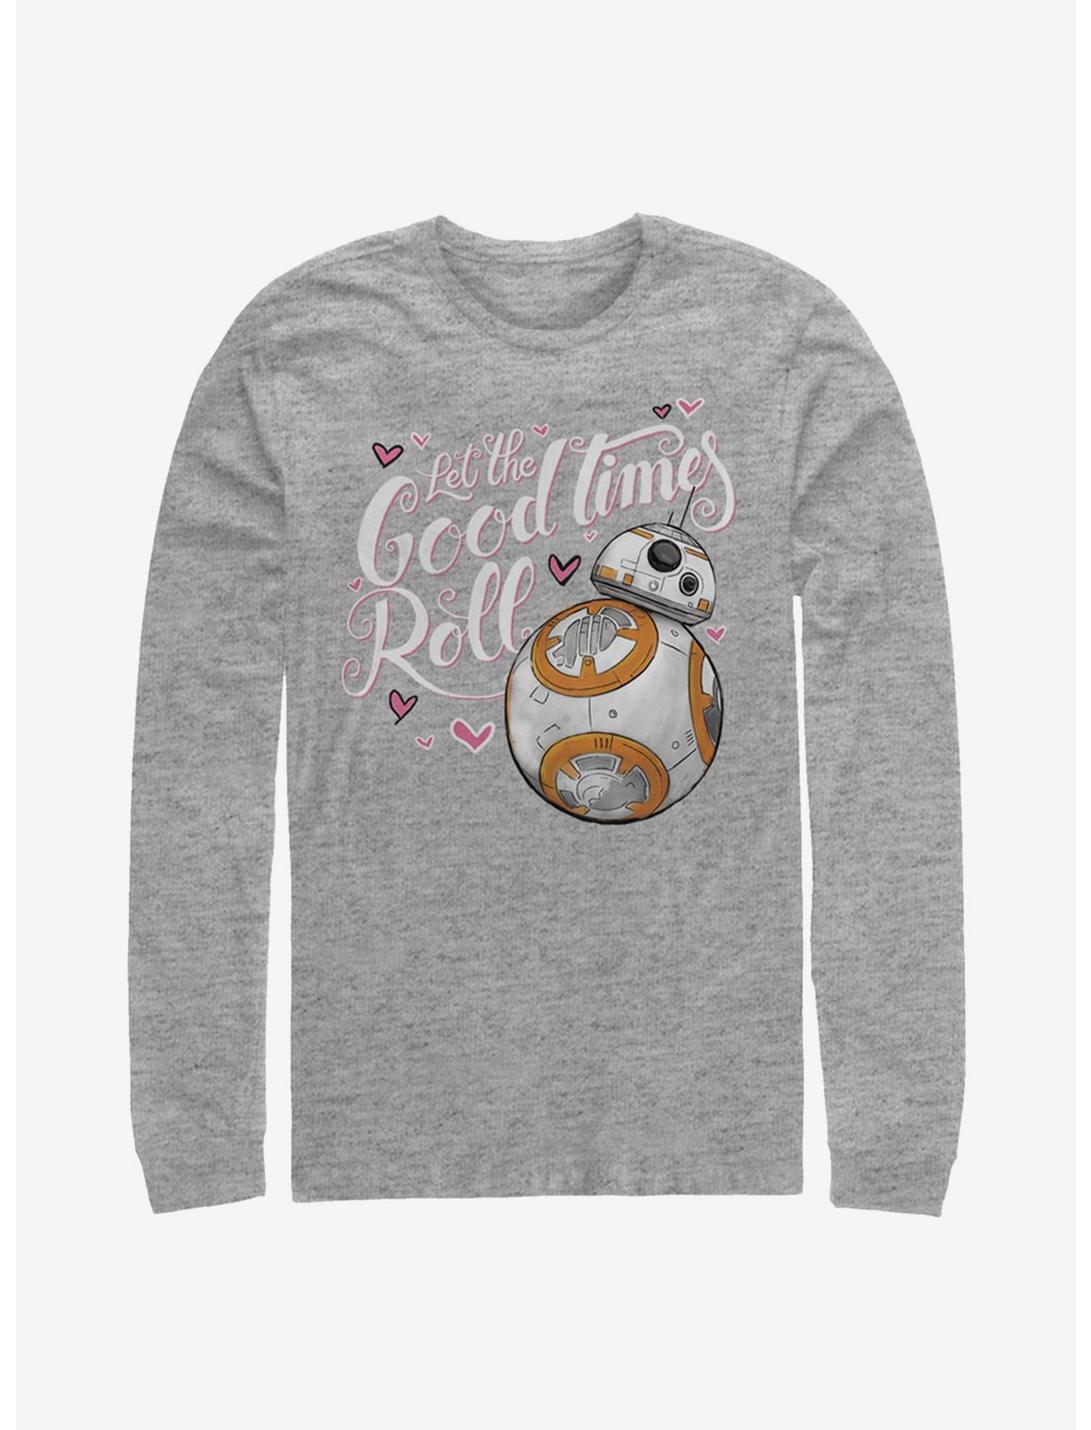 Star Wars Episode VII The Force Awakens BB-8 Good Times Heart Long-Sleeve T-Shirt, ATH HTR, hi-res